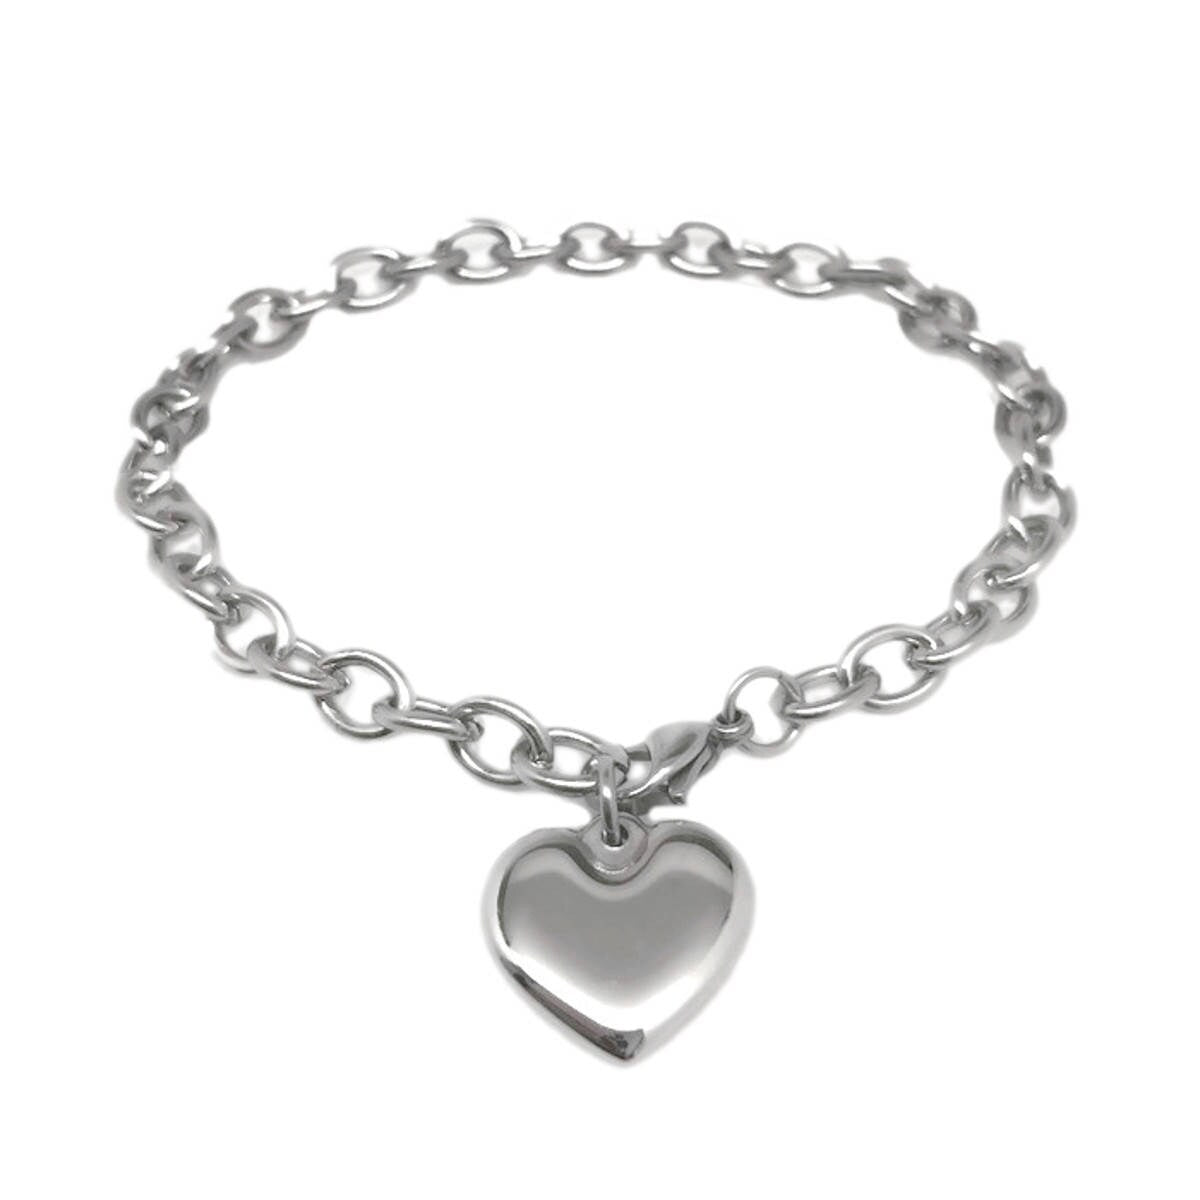 Stainless Steel Charm Bracelet, Silver Heart, Jewelry for Mom, Charm Chain, Great for Sensitive Skin